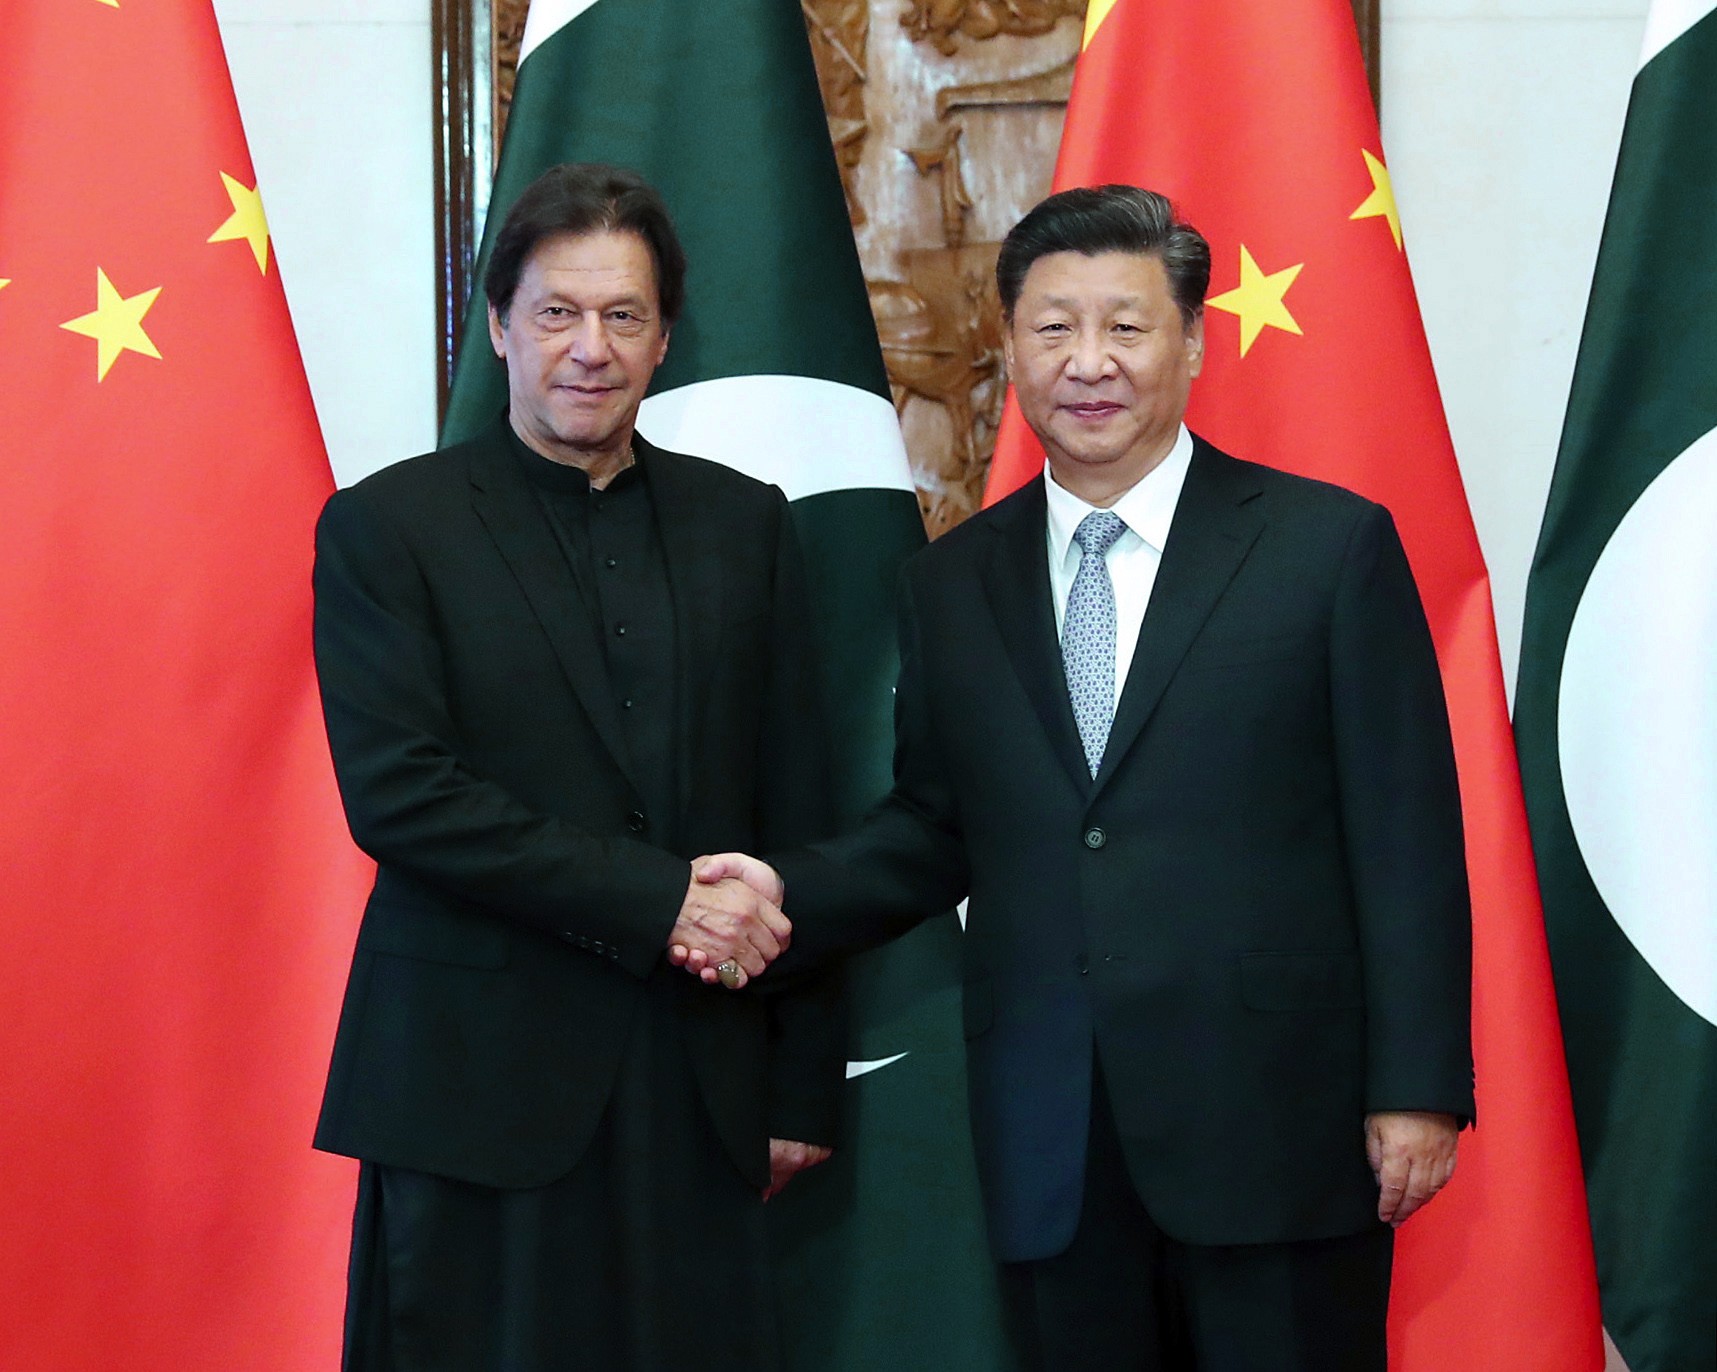 Pakistani Prime Minister Imran Khan meets Chinese President Xi Jinping at the Diaoyutai State Guesthouse in Beijing on October 9. Photo: Xinhua